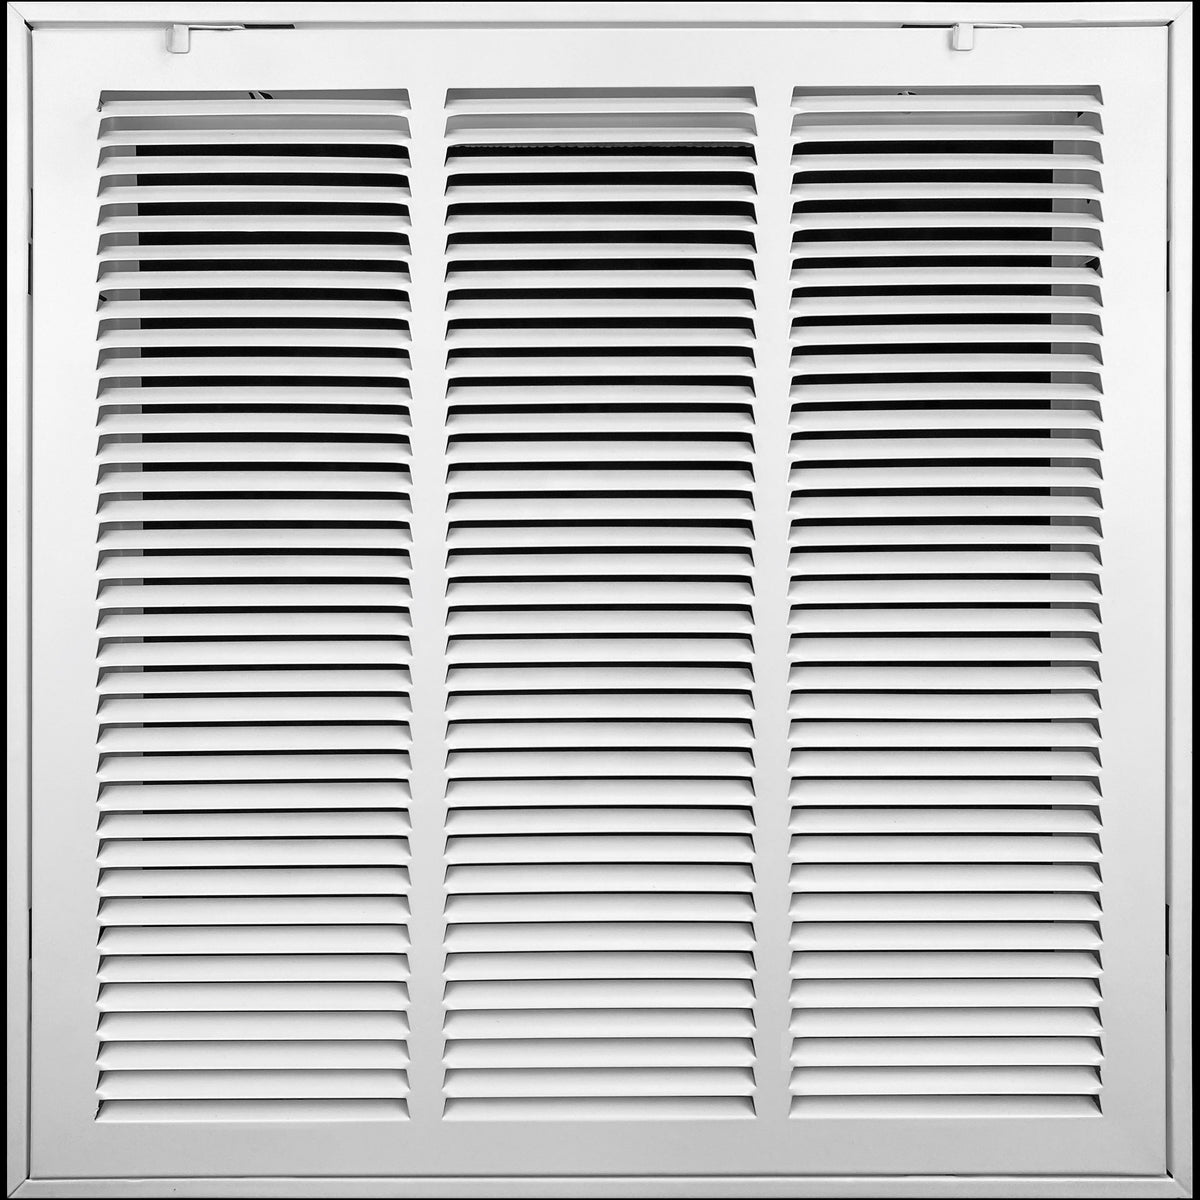 airgrilles 18" x 18" duct opening   steel return air filter grille for sidewall and ceiling hnd-rafg1-wh-18x18 b07p8g112x - 1